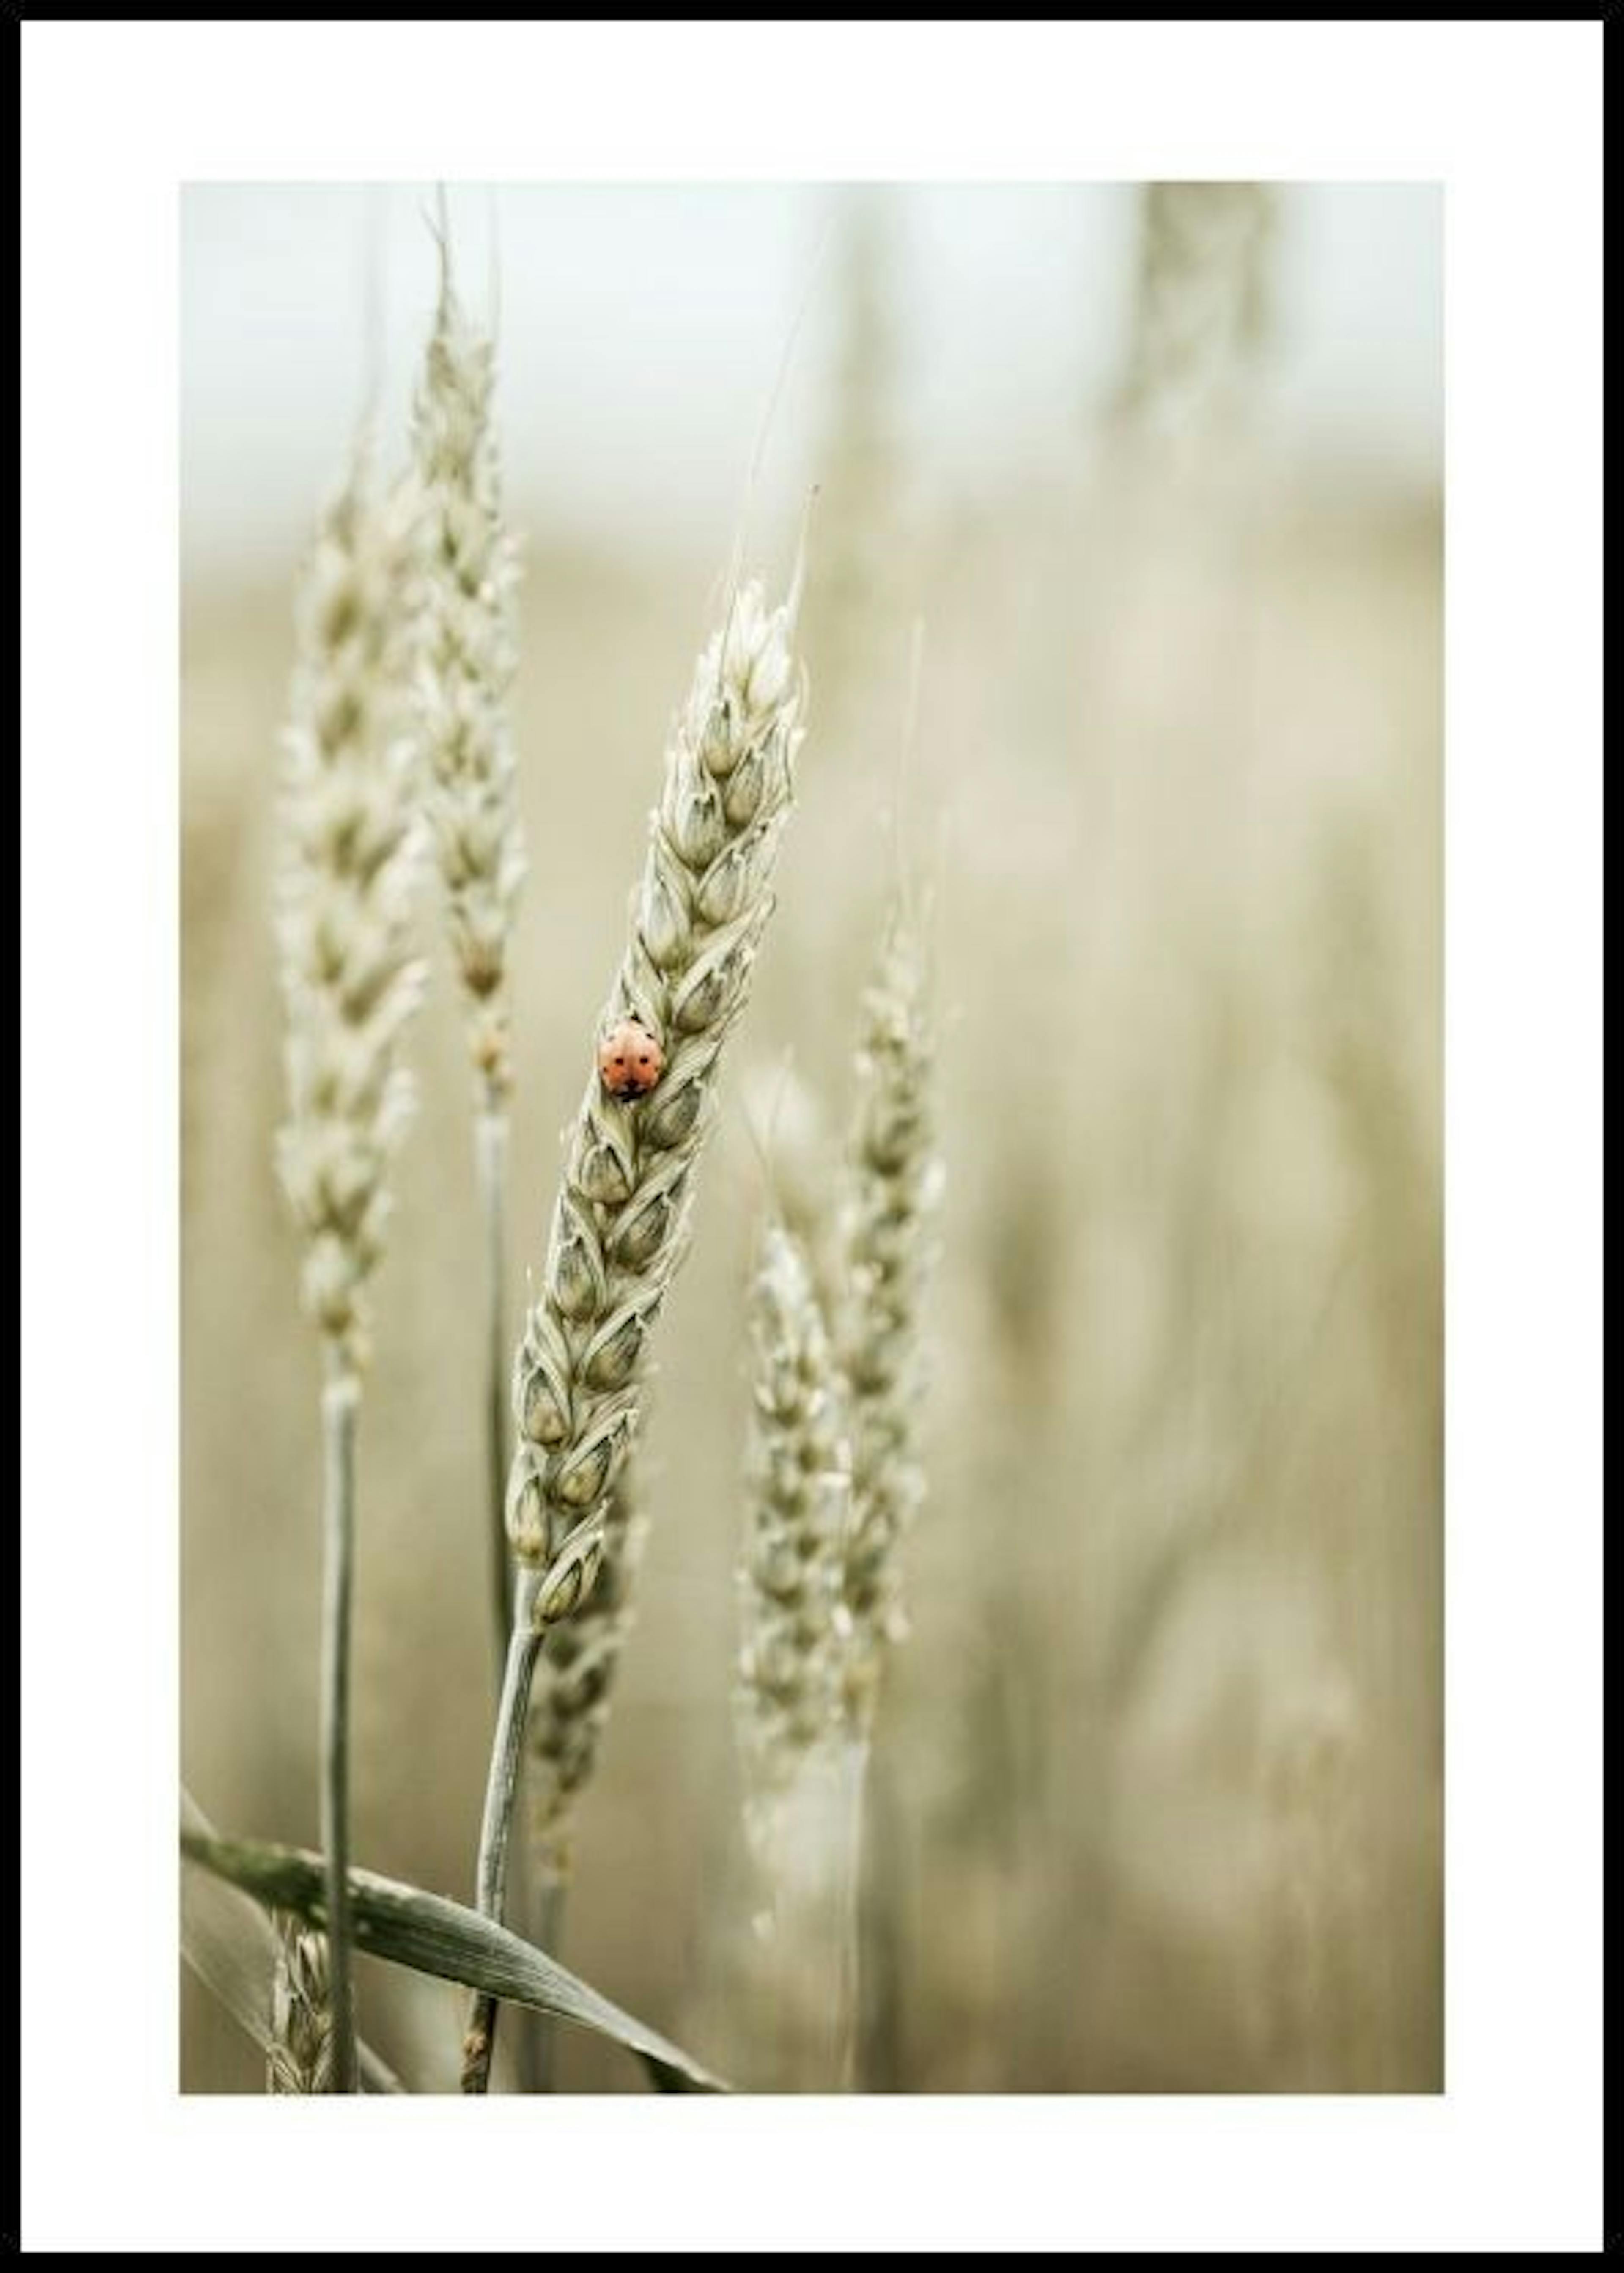 Ladybug in the Field Poster 0